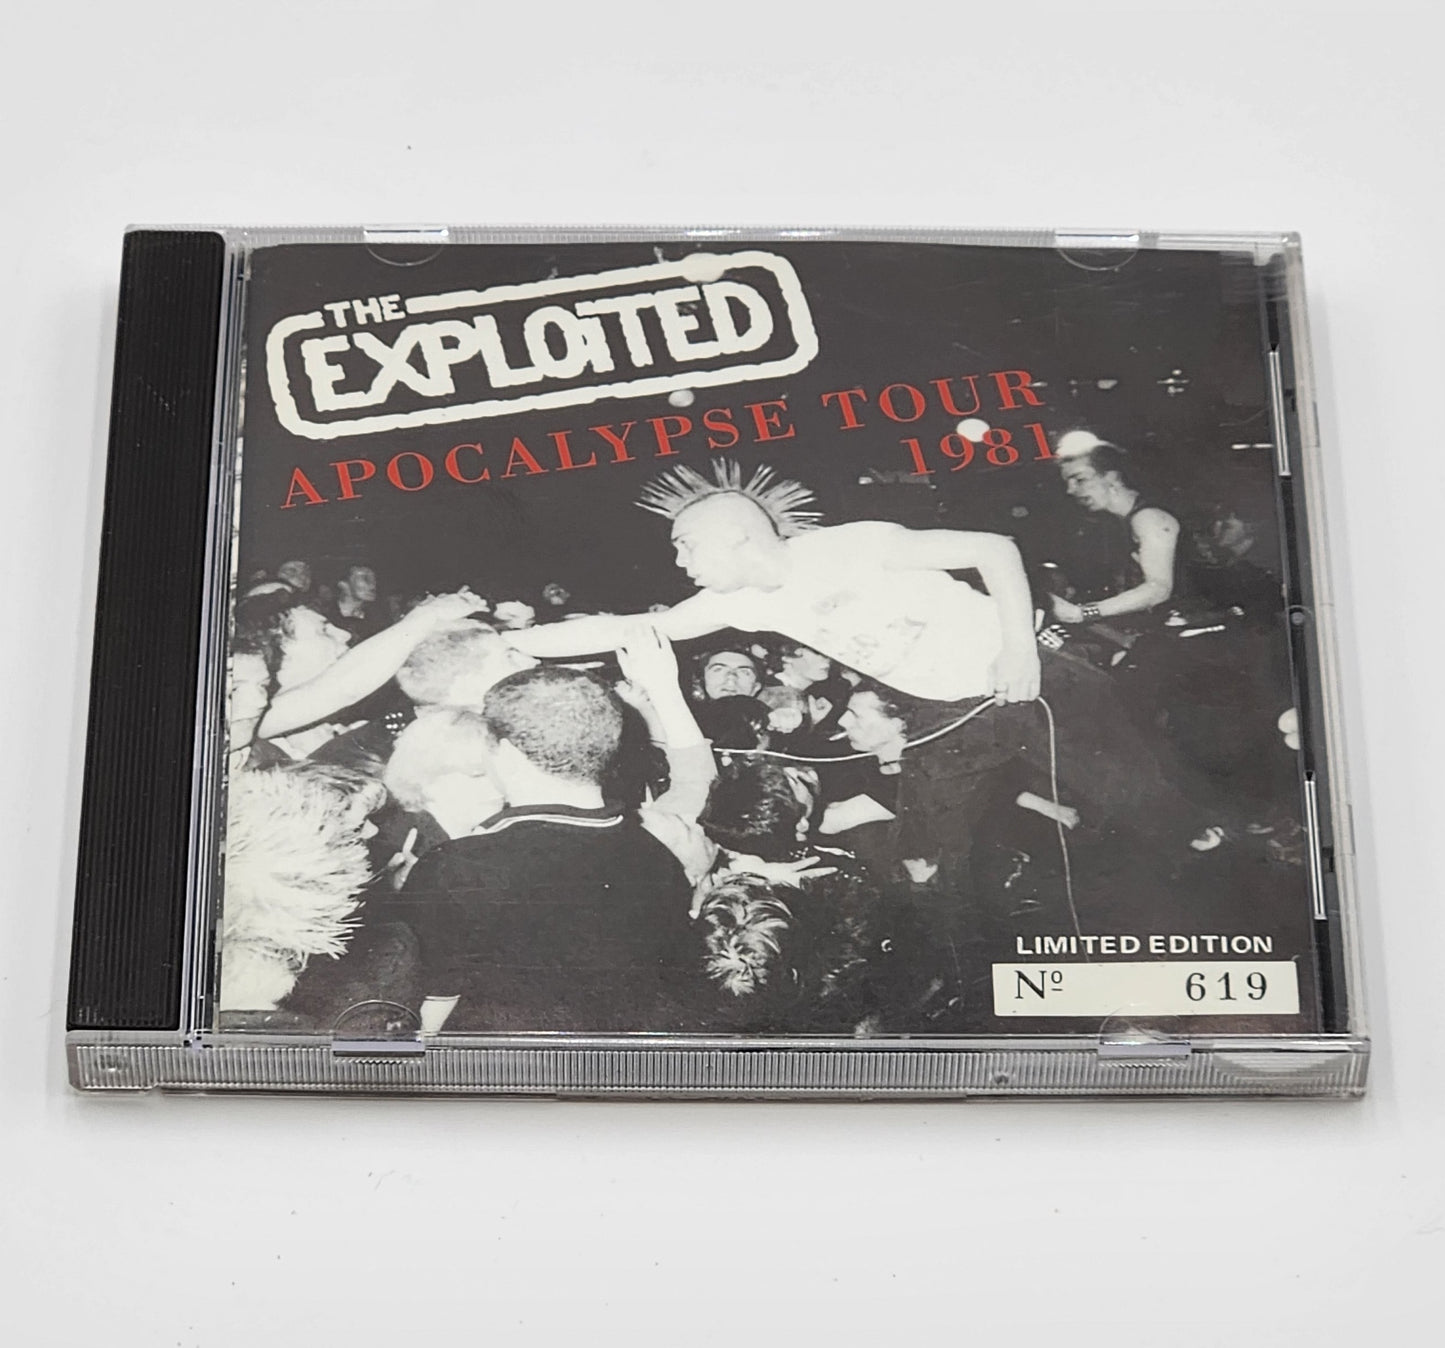 The Exploited "Apocalypse Tour 1981" Limited Ed & Numbered Punk CD